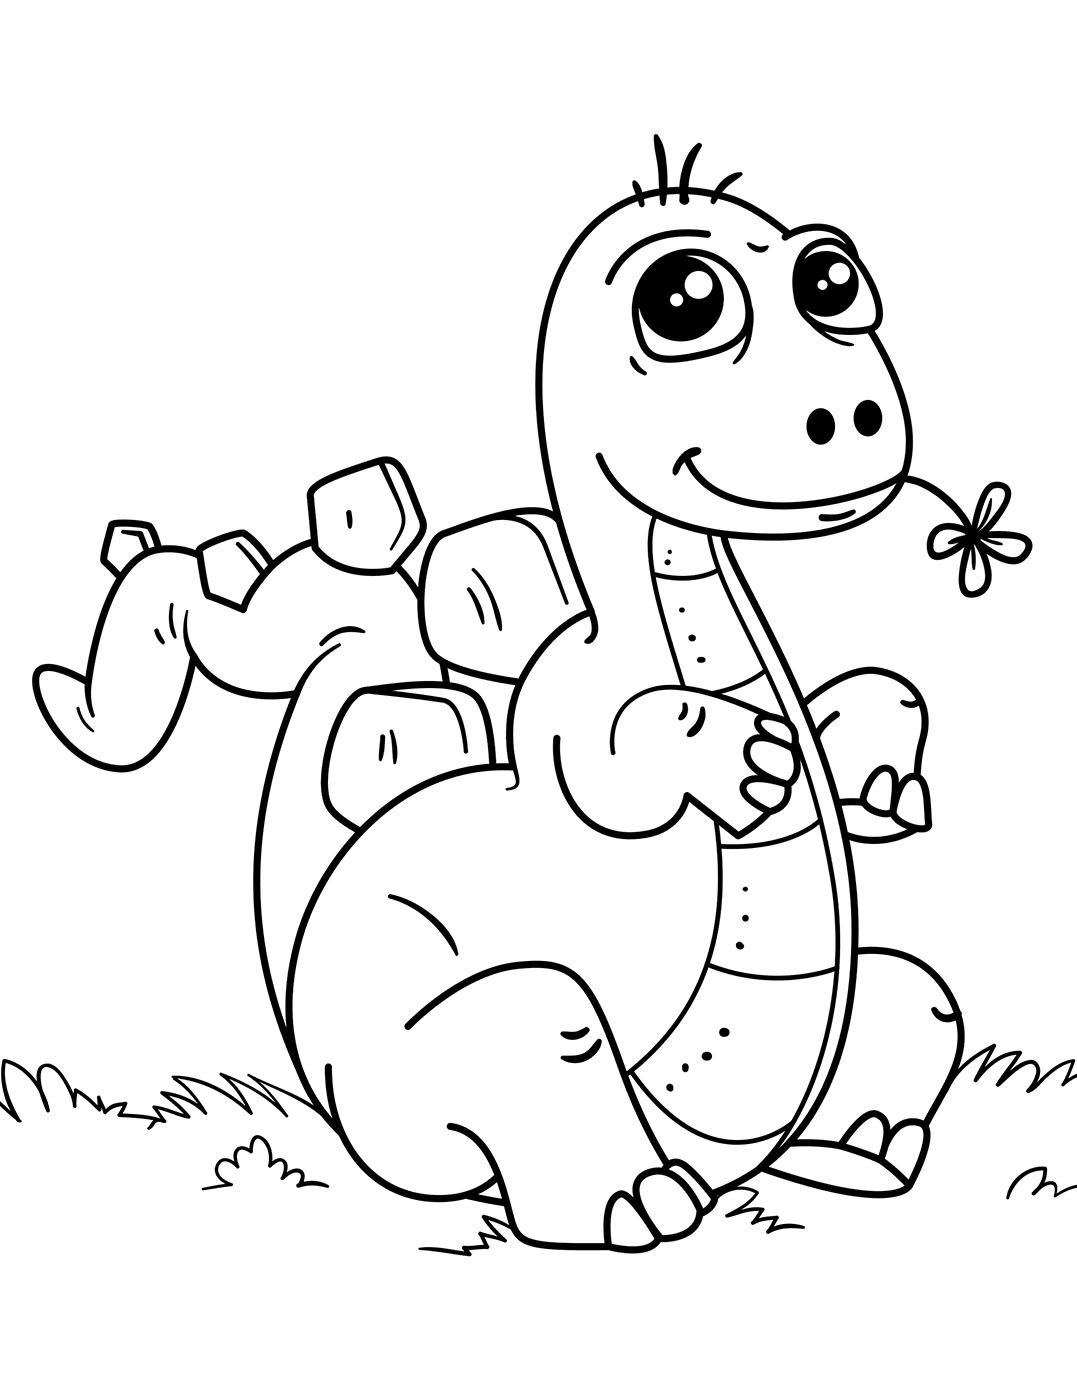 Simple Dinosaur Coloring Pages - Home Design Ideas